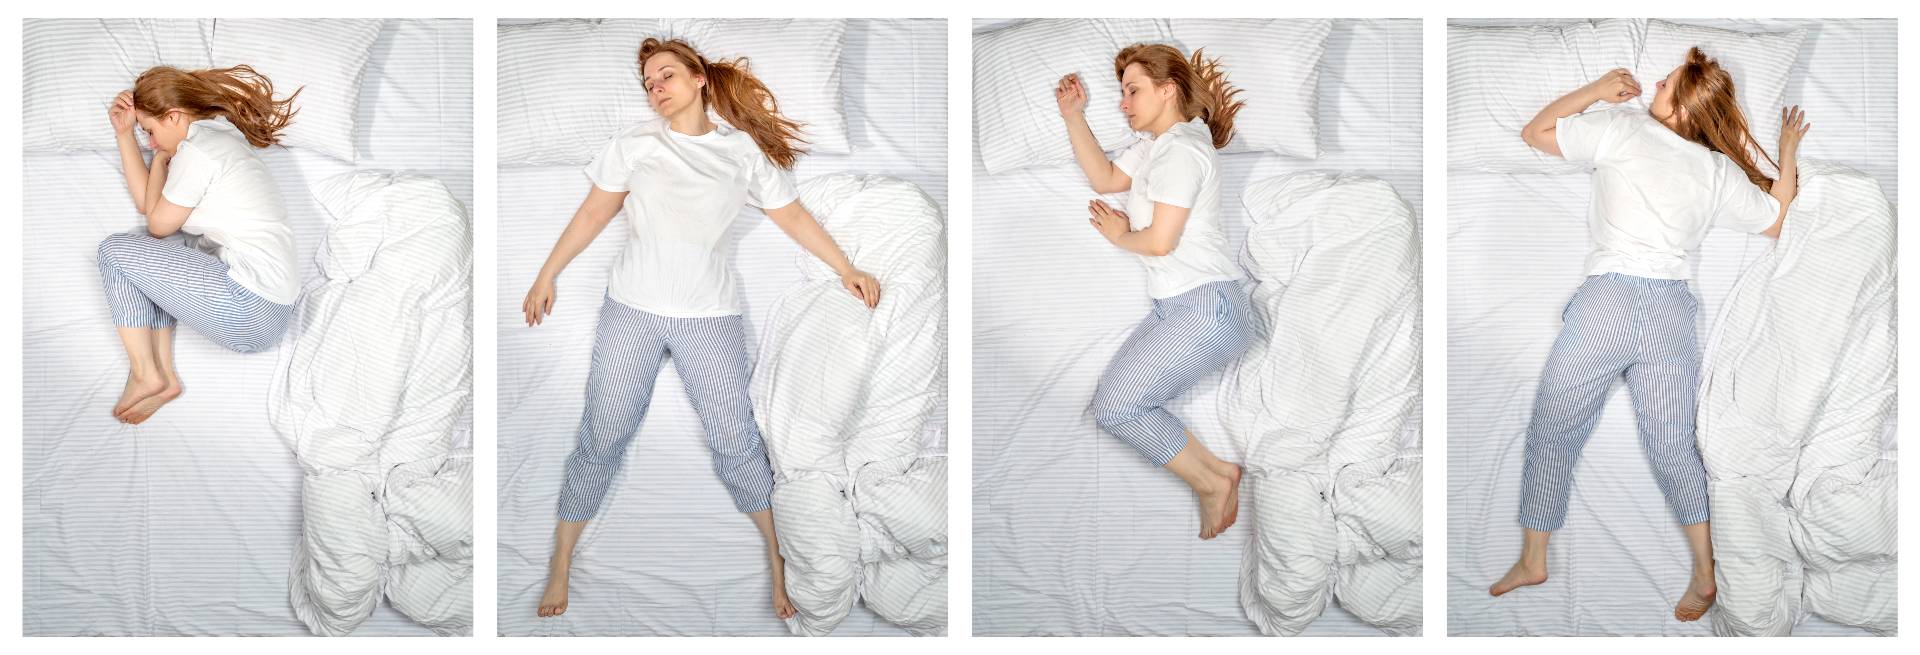 Various poses of a sleeping woman. Female side sleeper fetal position, on the back, on her side, face down on stomach in bed. Deep restful sleep. Girl lying in a nightie pajamas on white bed linen